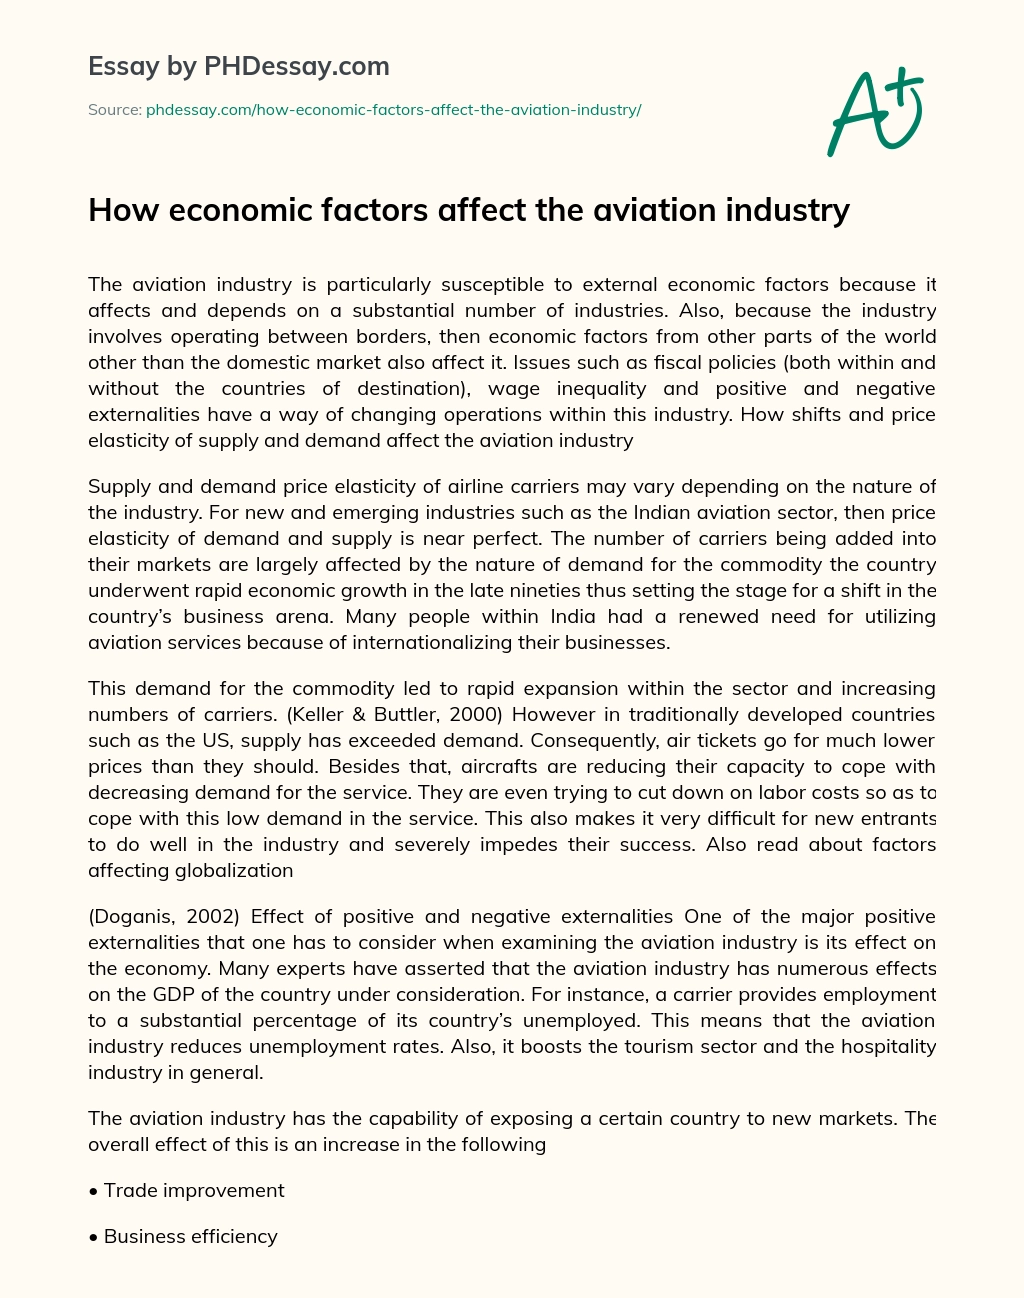 How economic factors affect the aviation industry essay